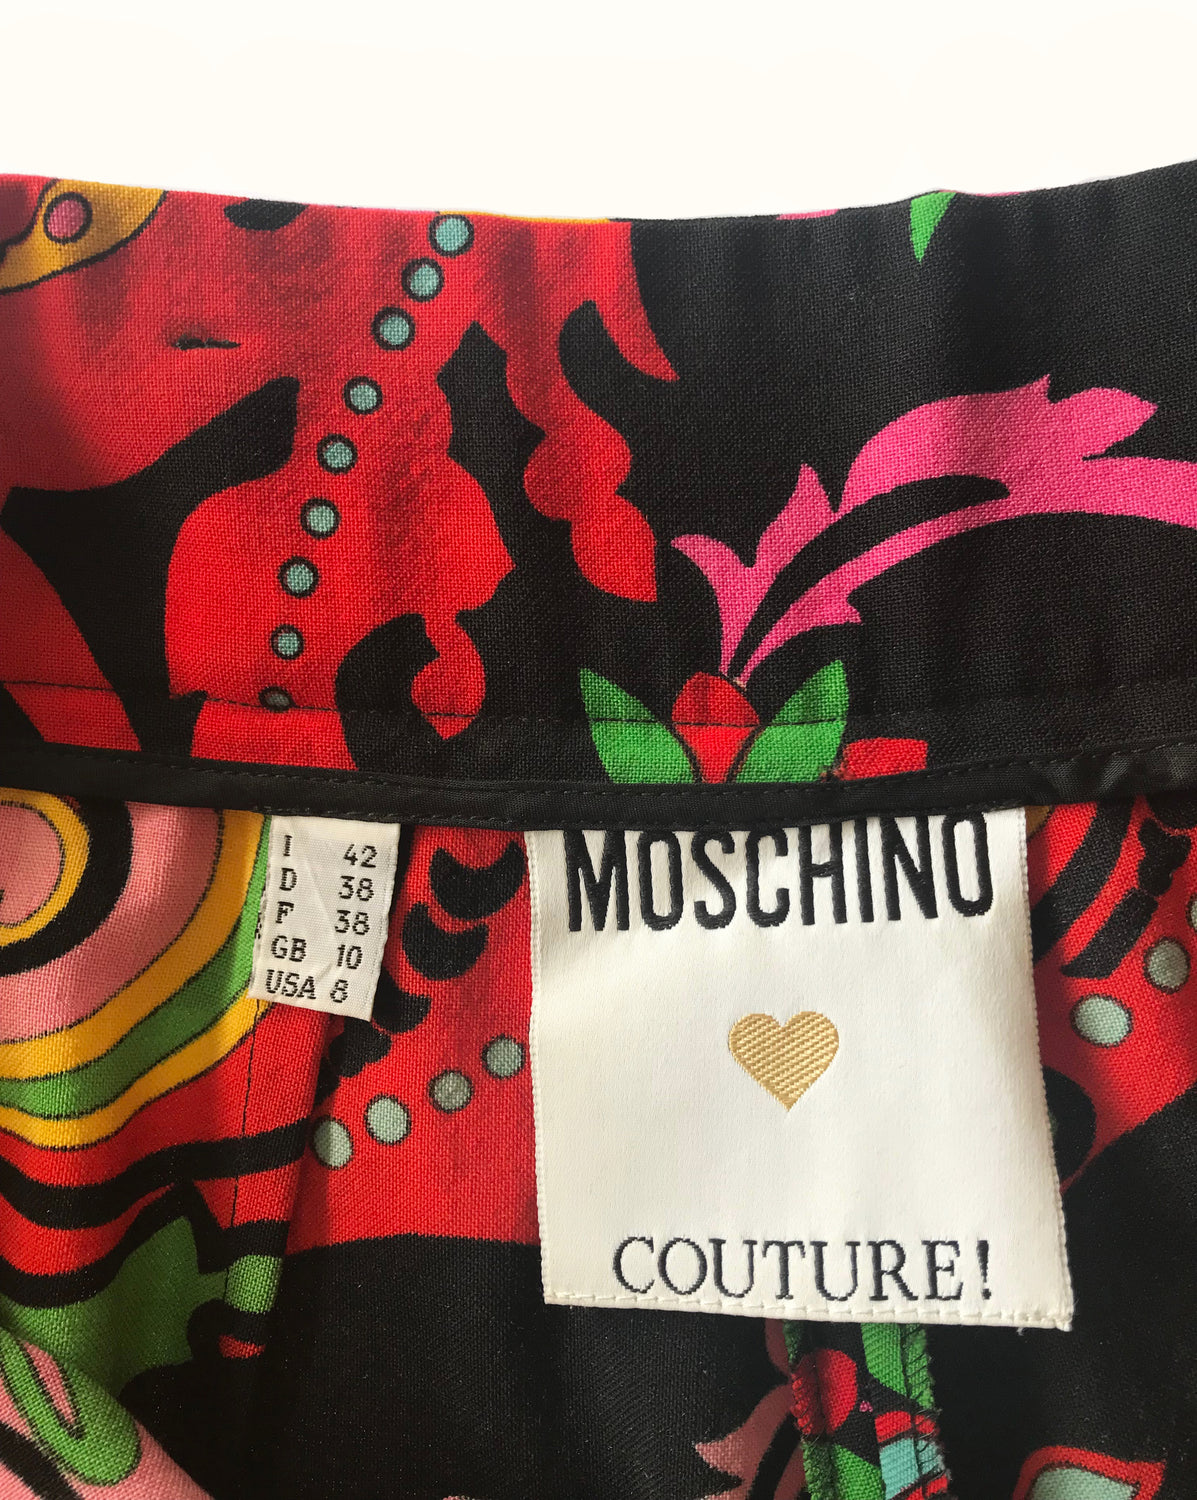 Fruit Vintage Moschino Rare 1990s Psychedelic Print Pants